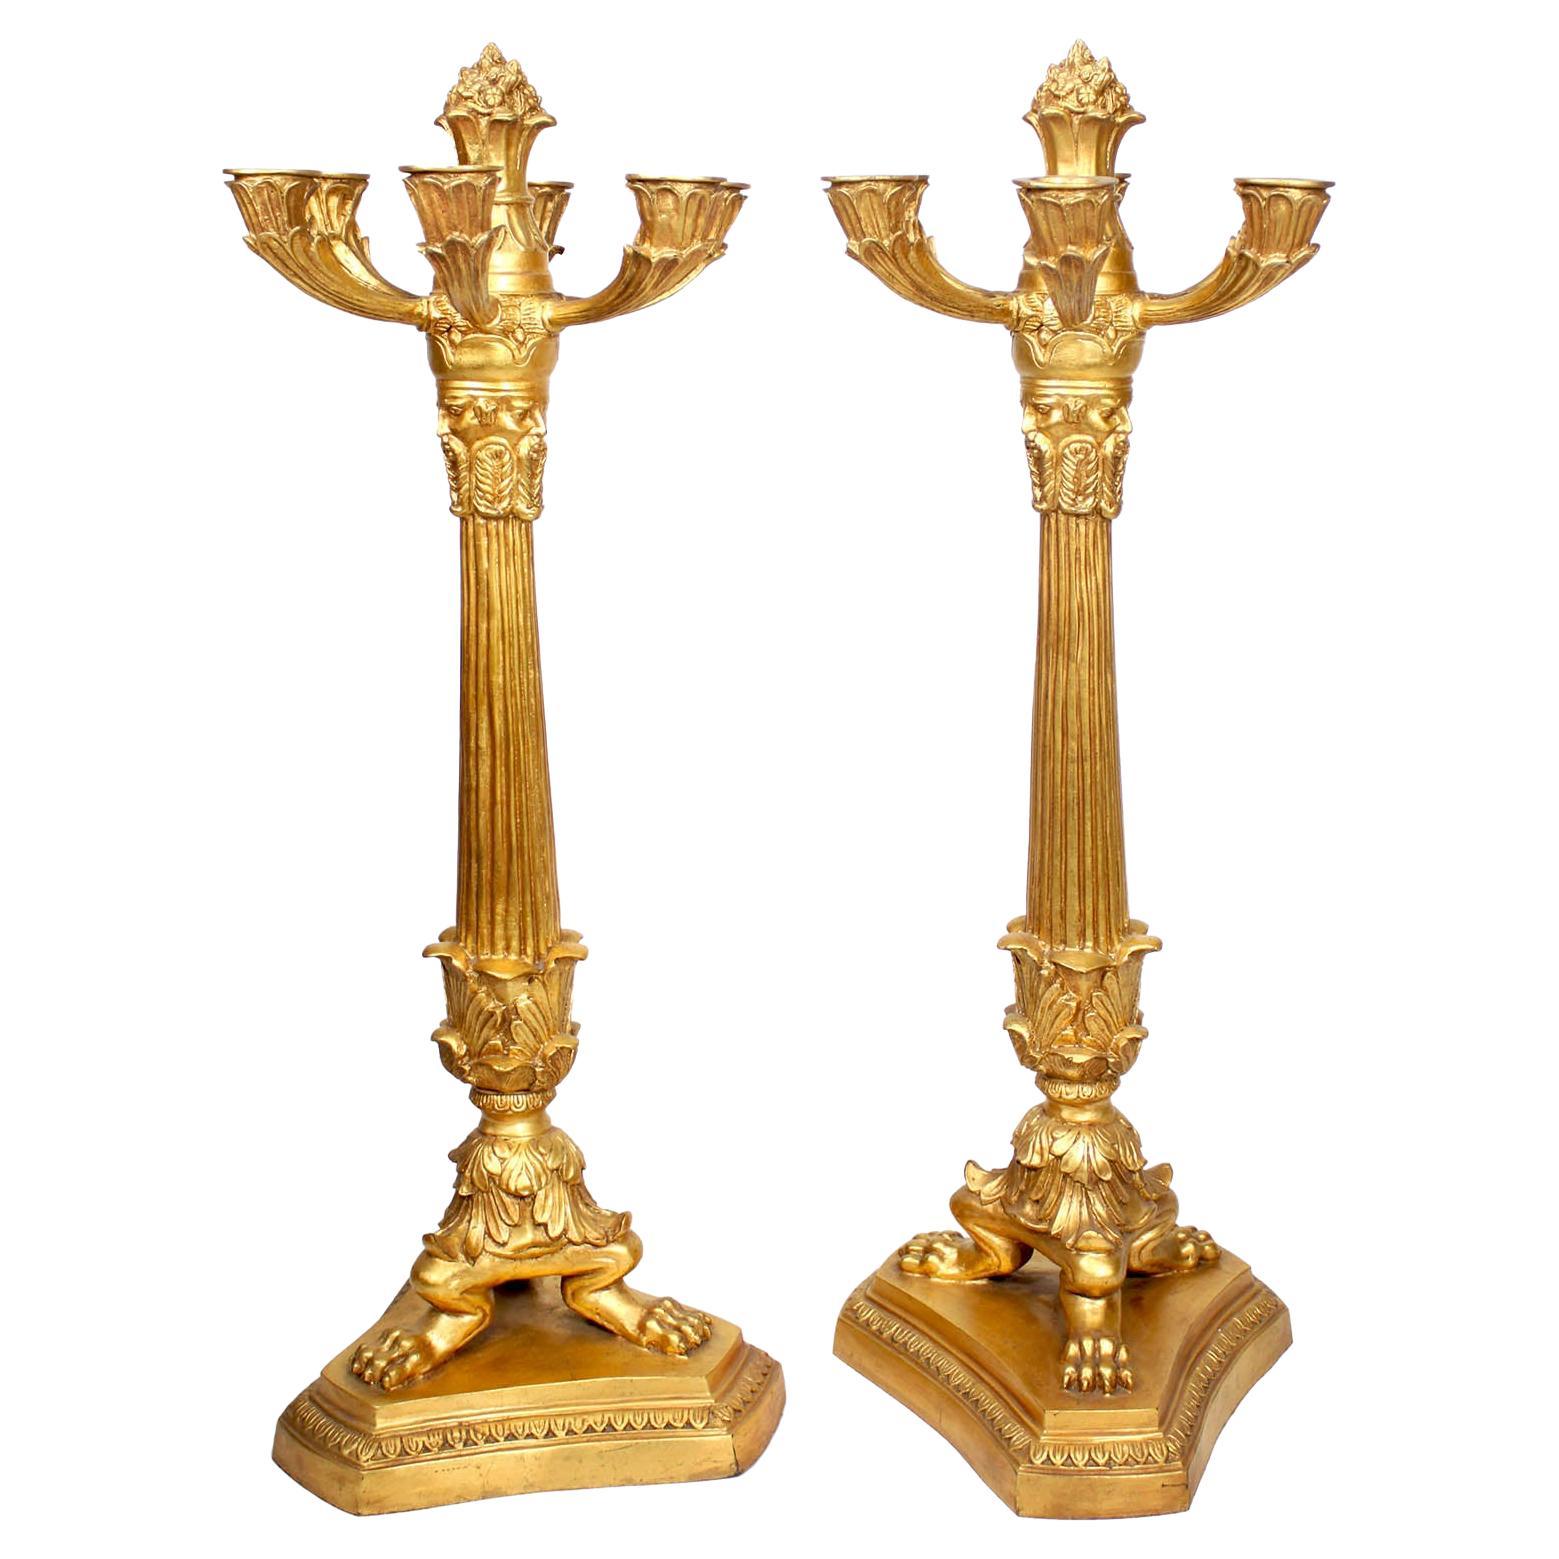  Pair of Empire Style Gilt-Metal Six-Light Candelabra, After a Model by Thomire For Sale